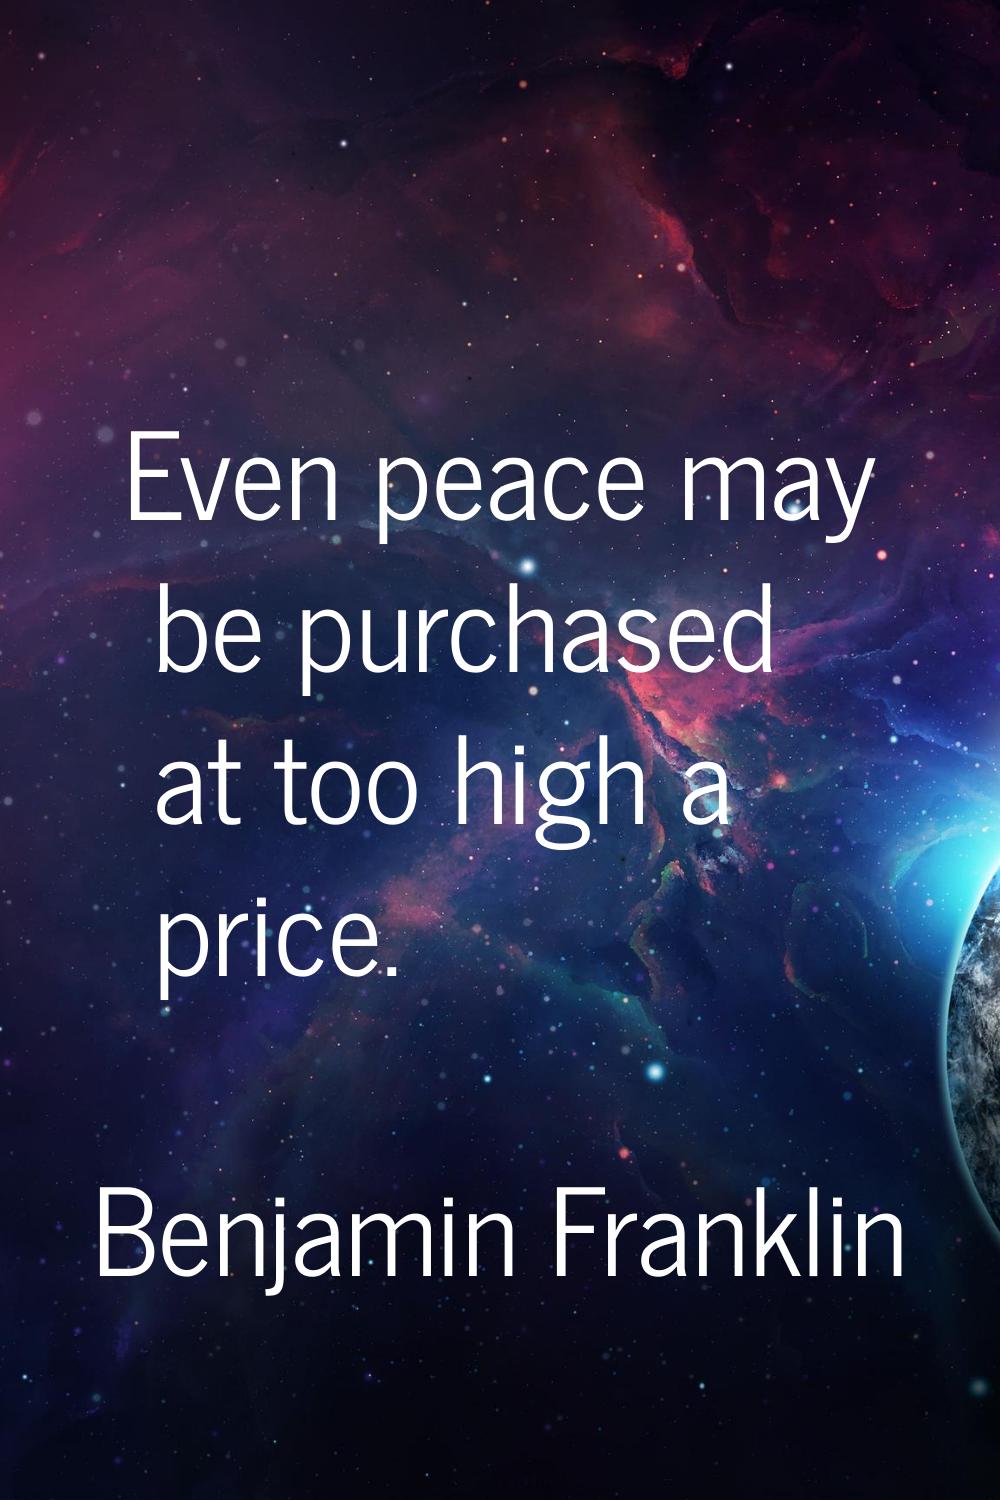 Even peace may be purchased at too high a price.